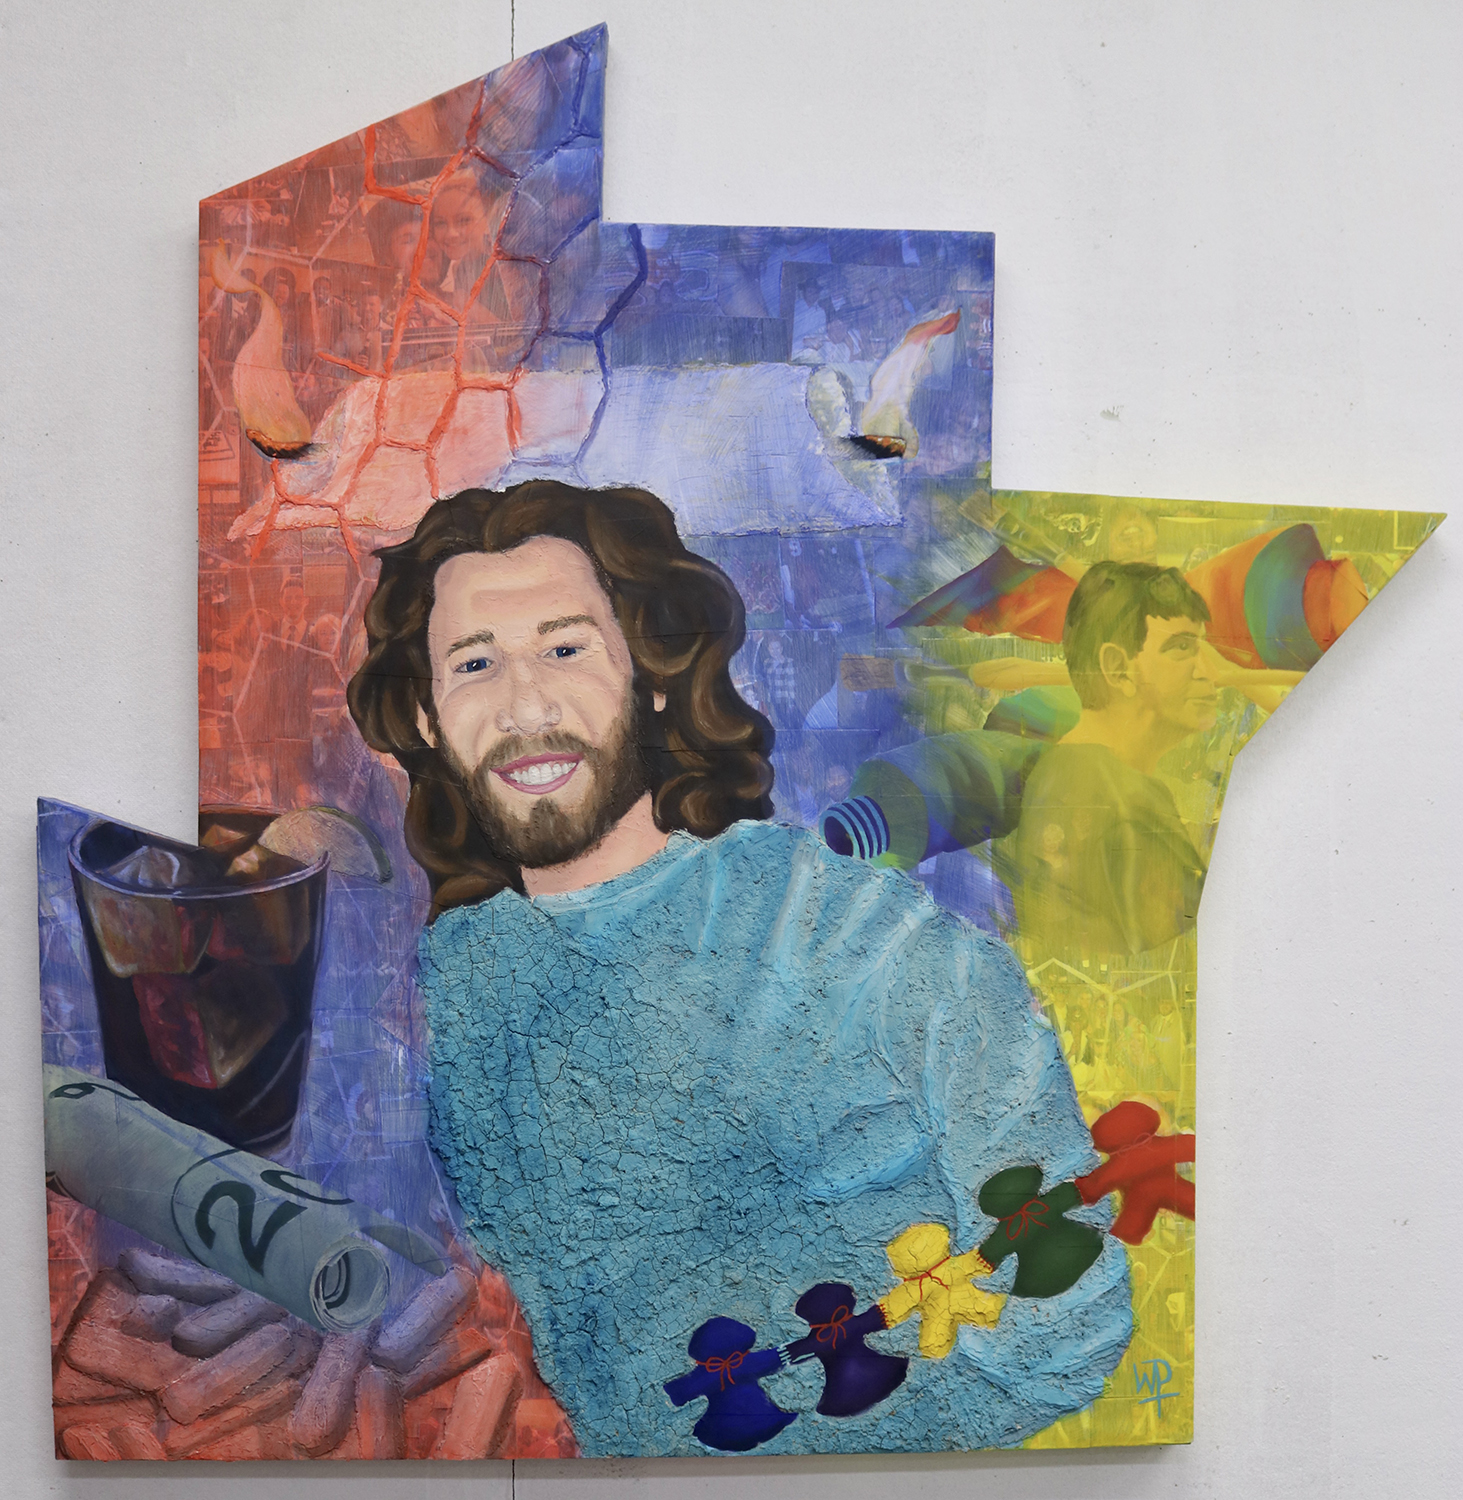 Collage portrait of young man in teal shirt with key iconography around image with precious moments collaged in background.